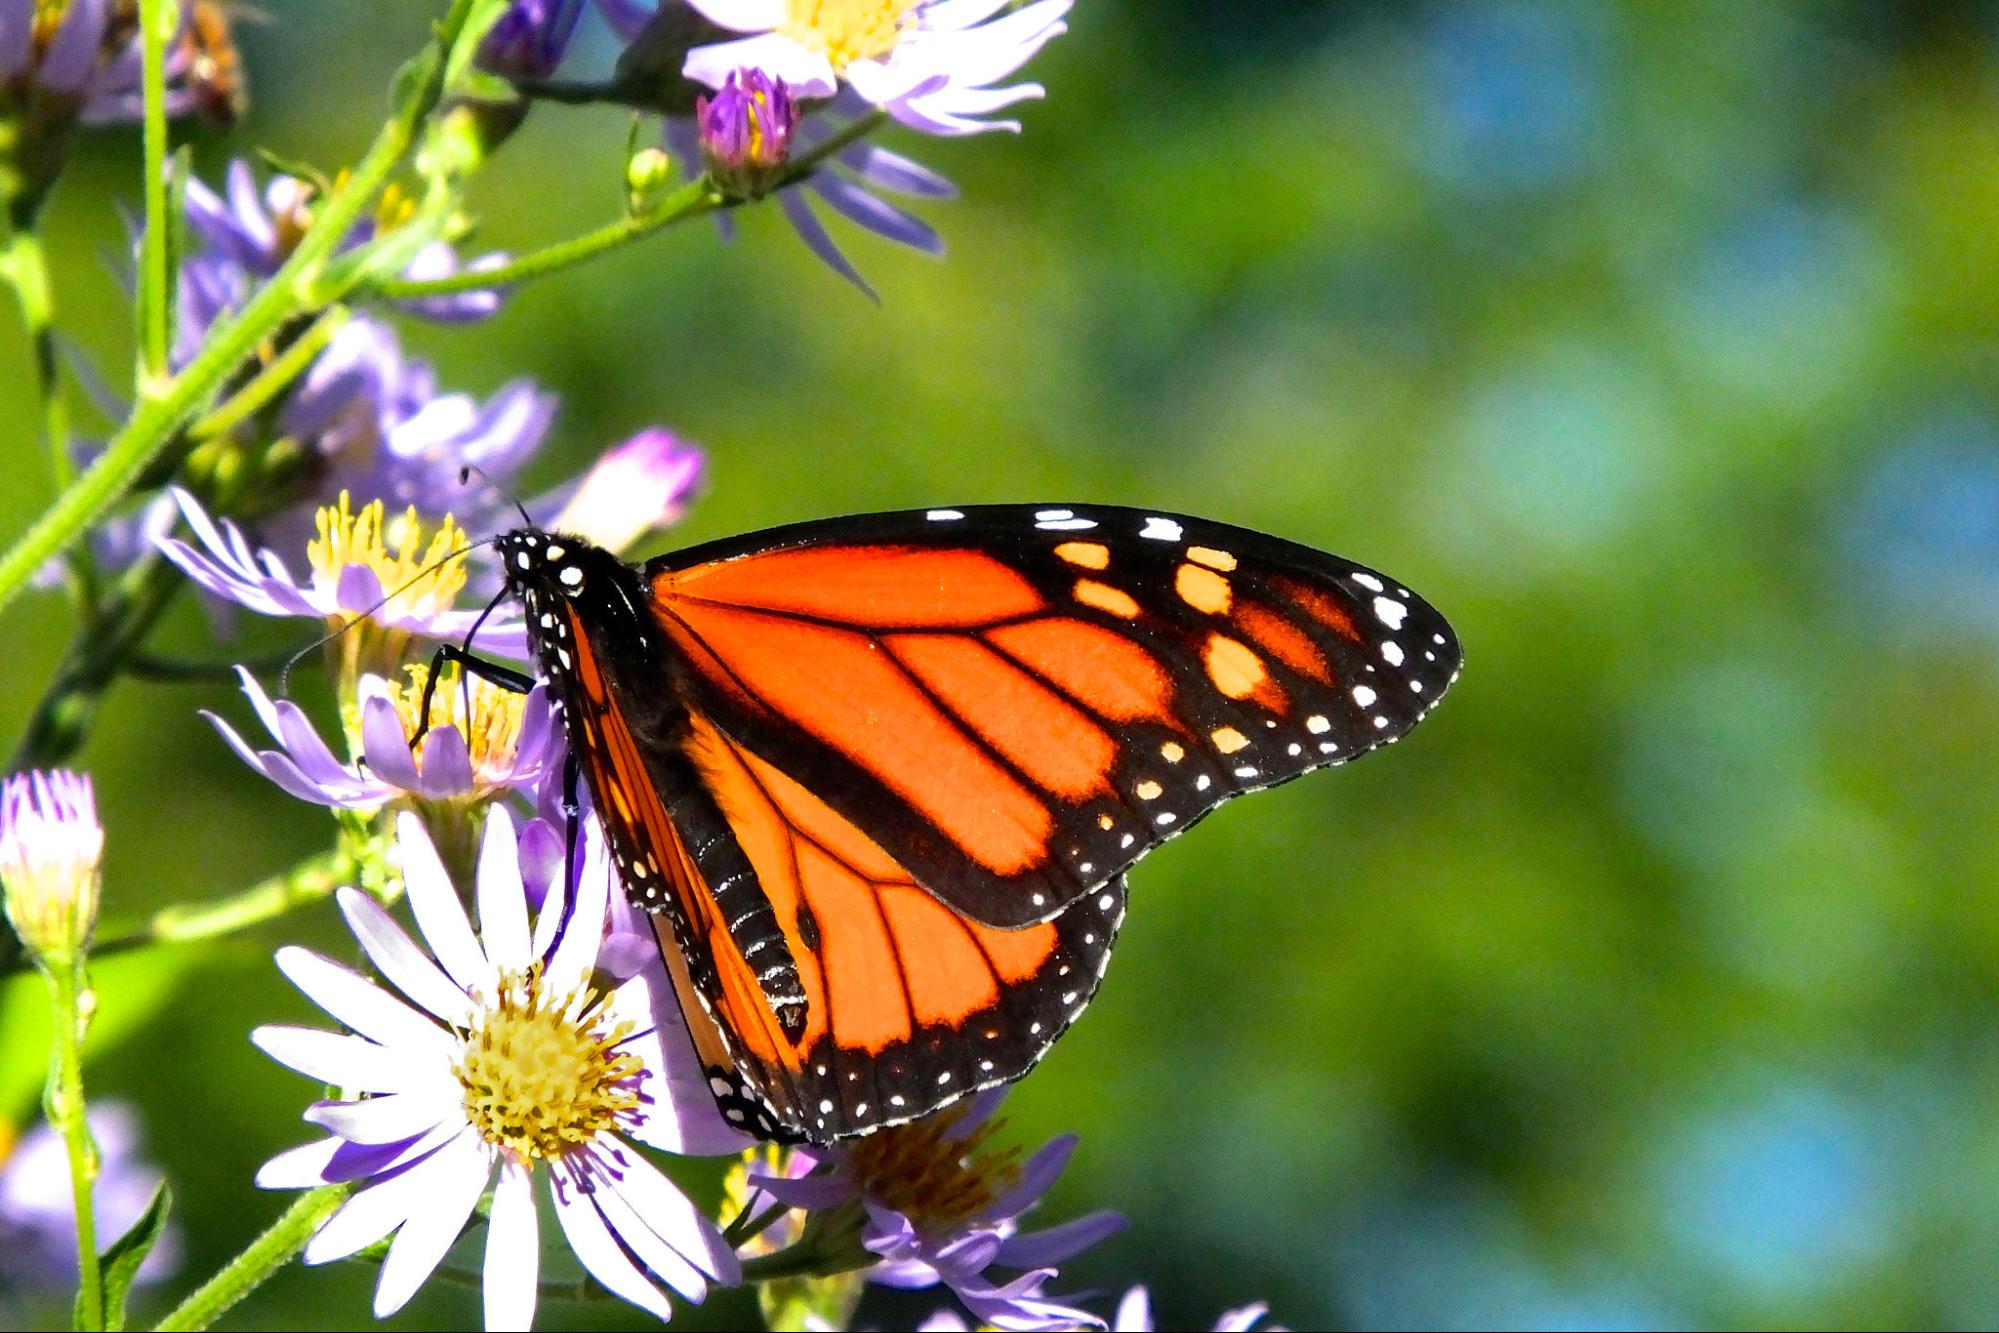 After Record Low, Monarch Butterflies Return to California